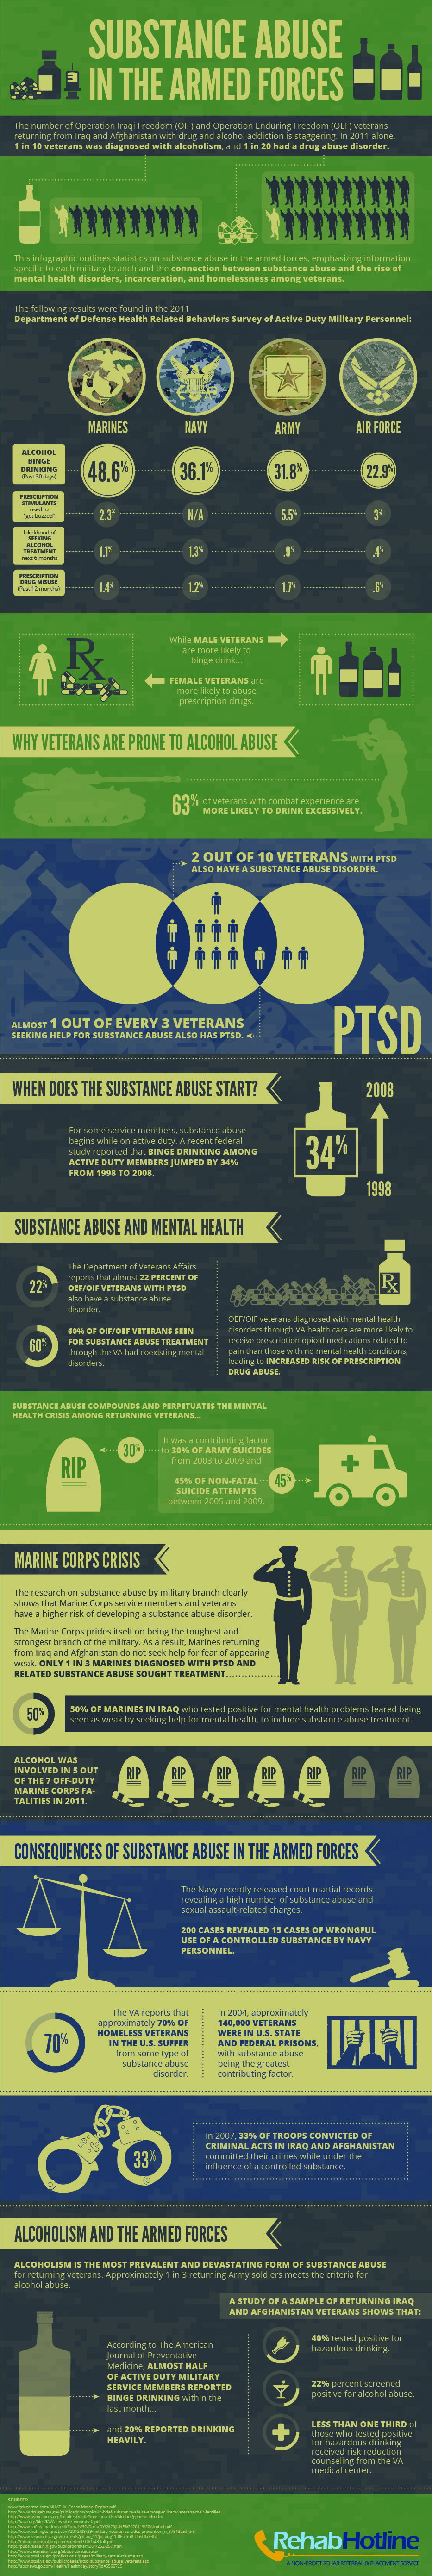 Substance Abuse in the Armed Forces